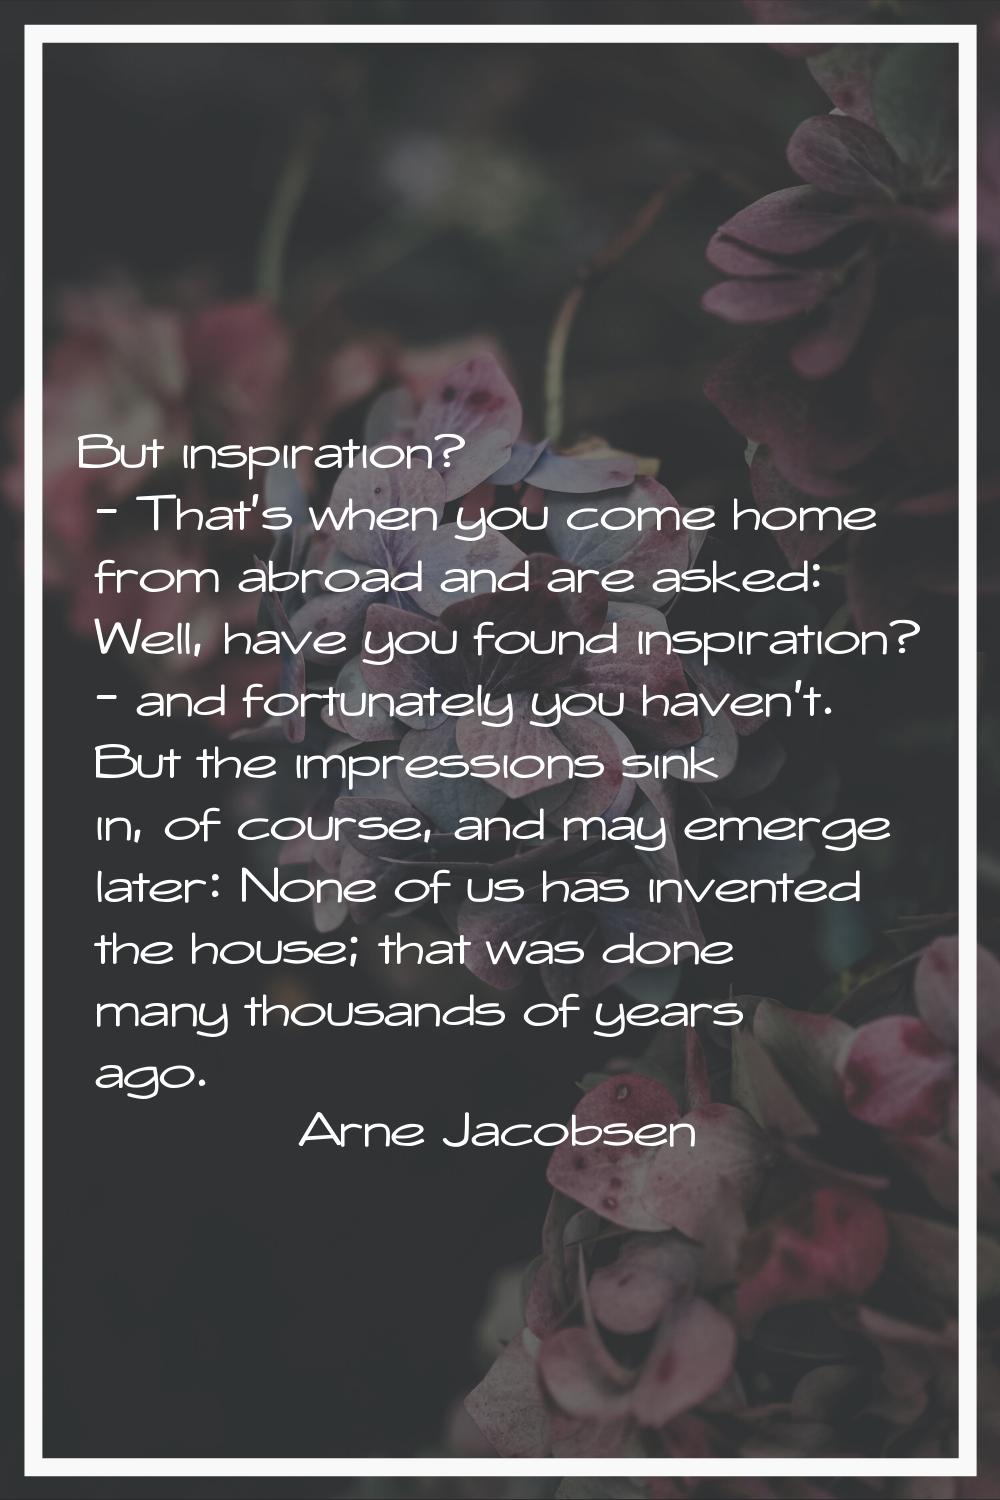 But inspiration? - That's when you come home from abroad and are asked: Well, have you found inspir